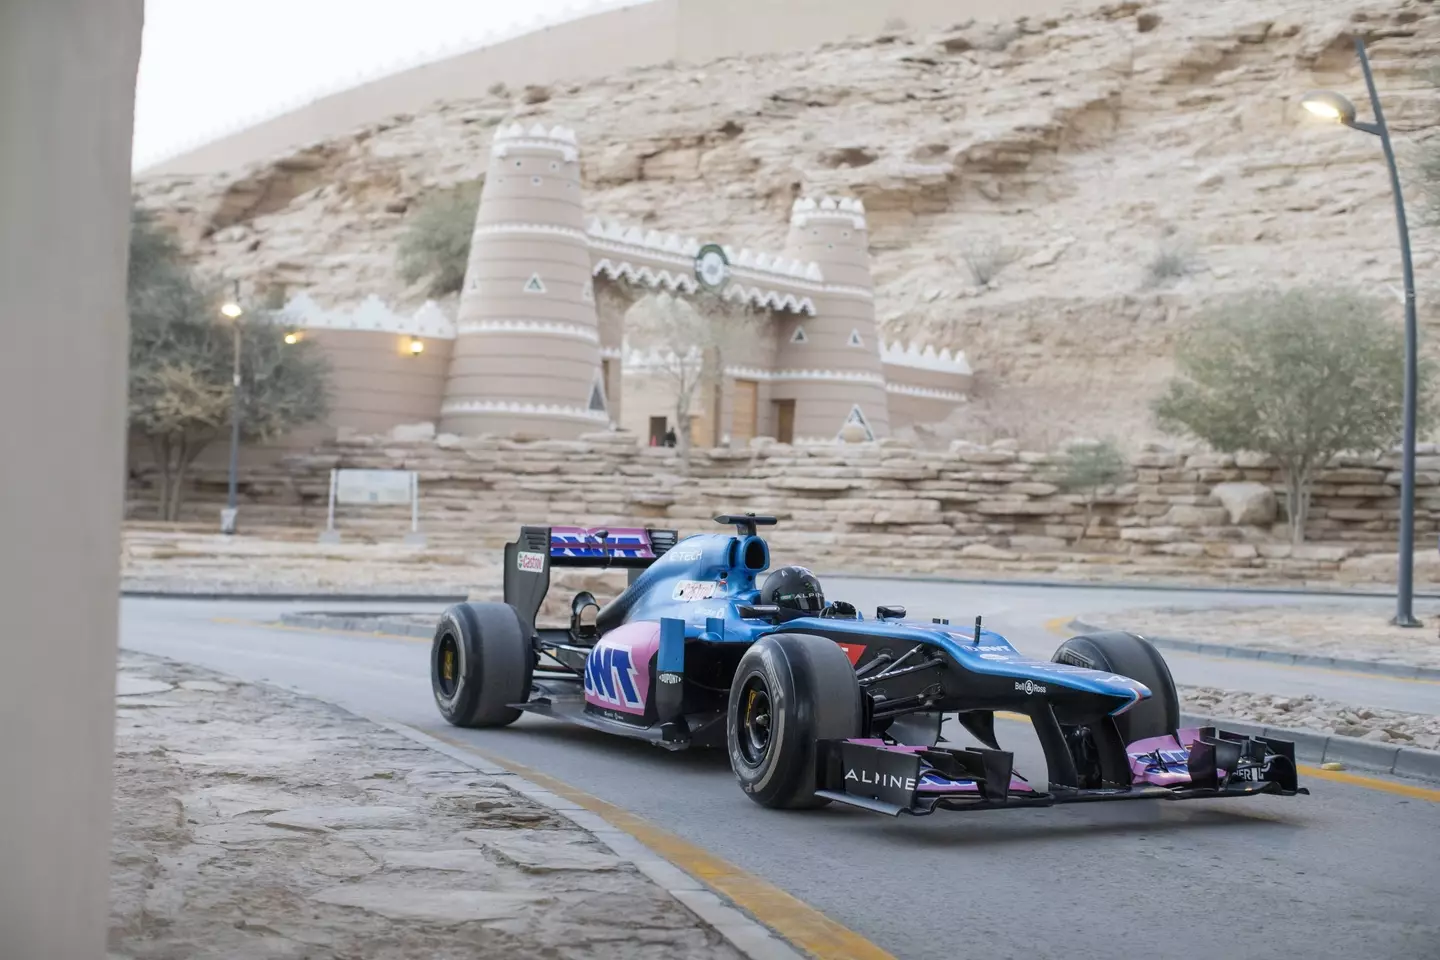 In 2022, F1 academy driver Abbi Pulling, 20, was invited by Saudi to take part in a demonstration, which showcased that 'anyone with enough drive' can follow their dreams.